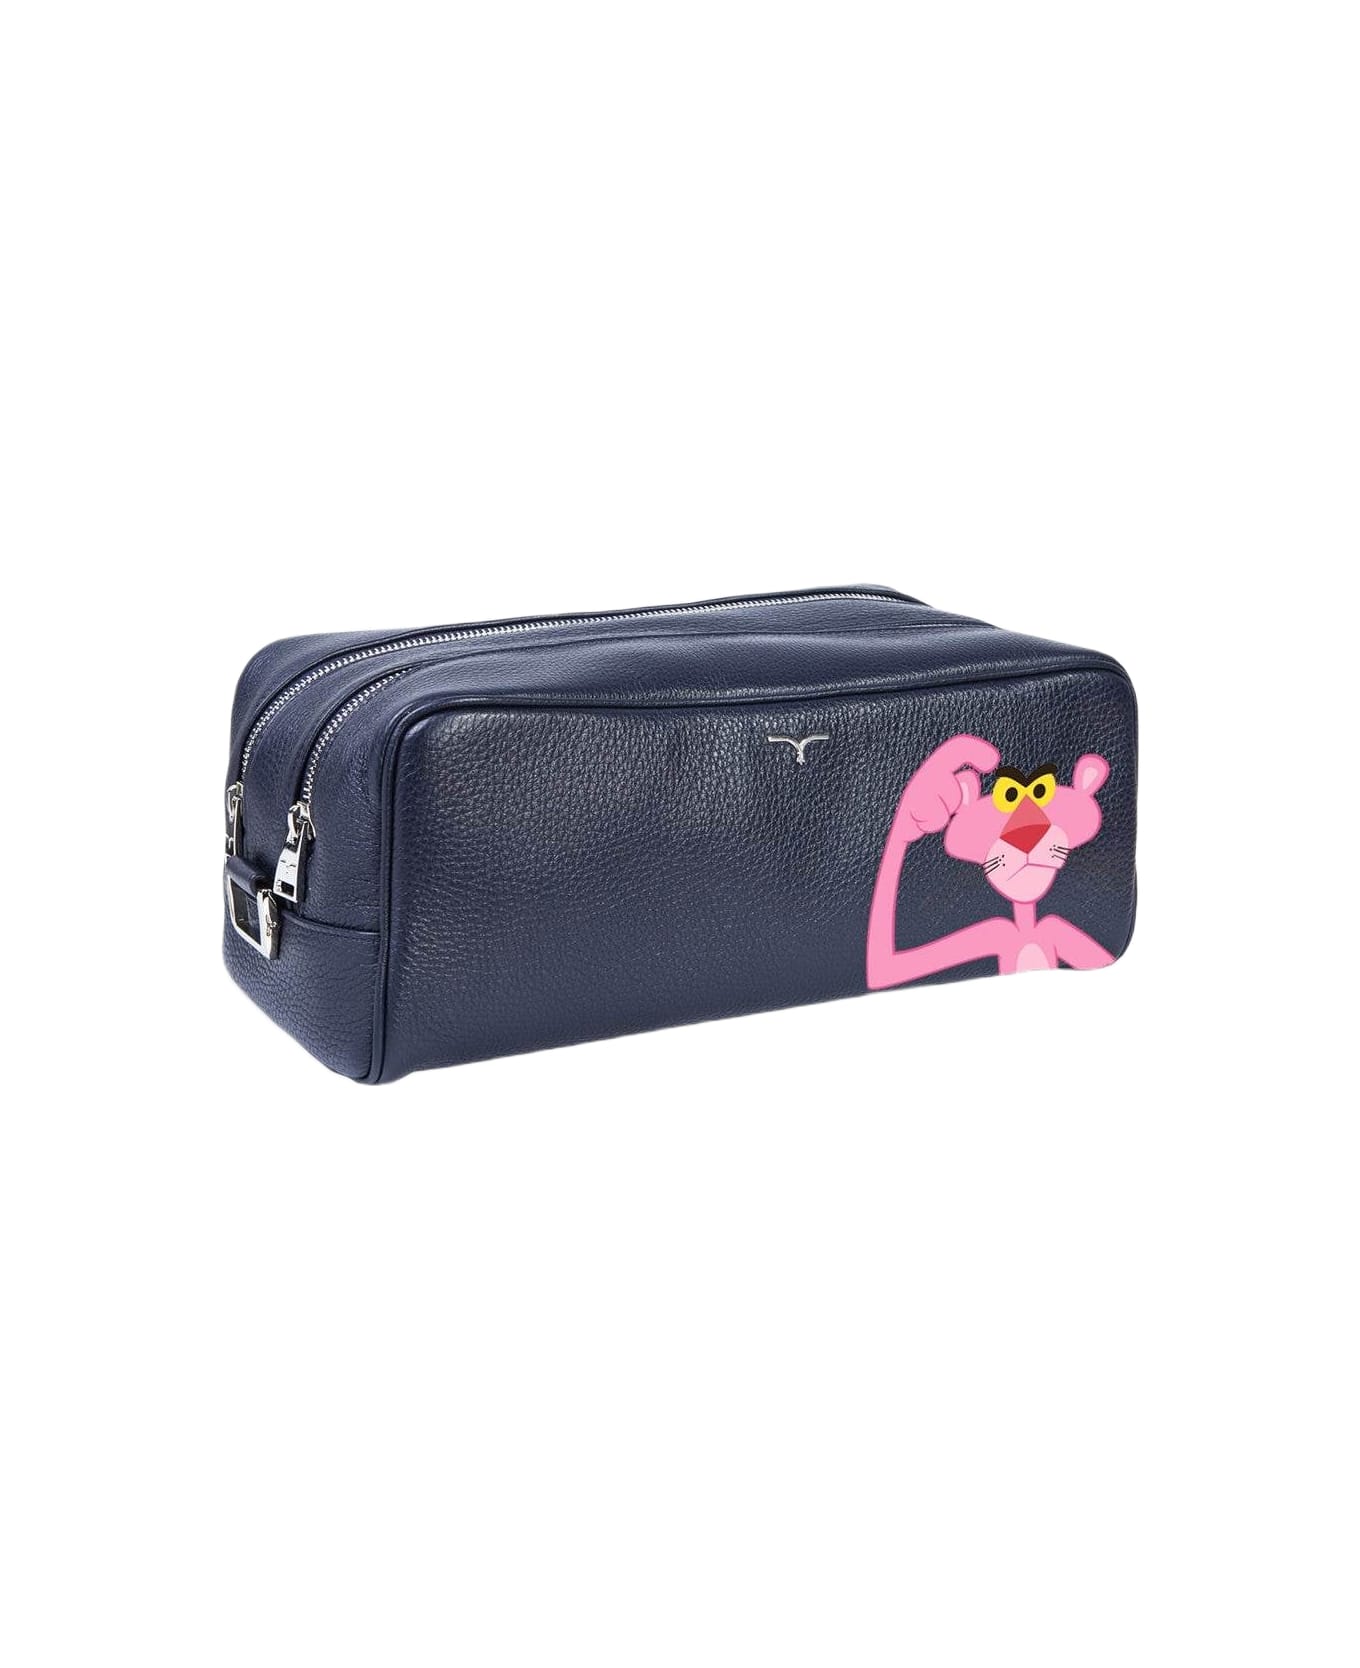 Larusmiani Nécessaire 'pink Panther' Luggage - Navy トラベルバッグ